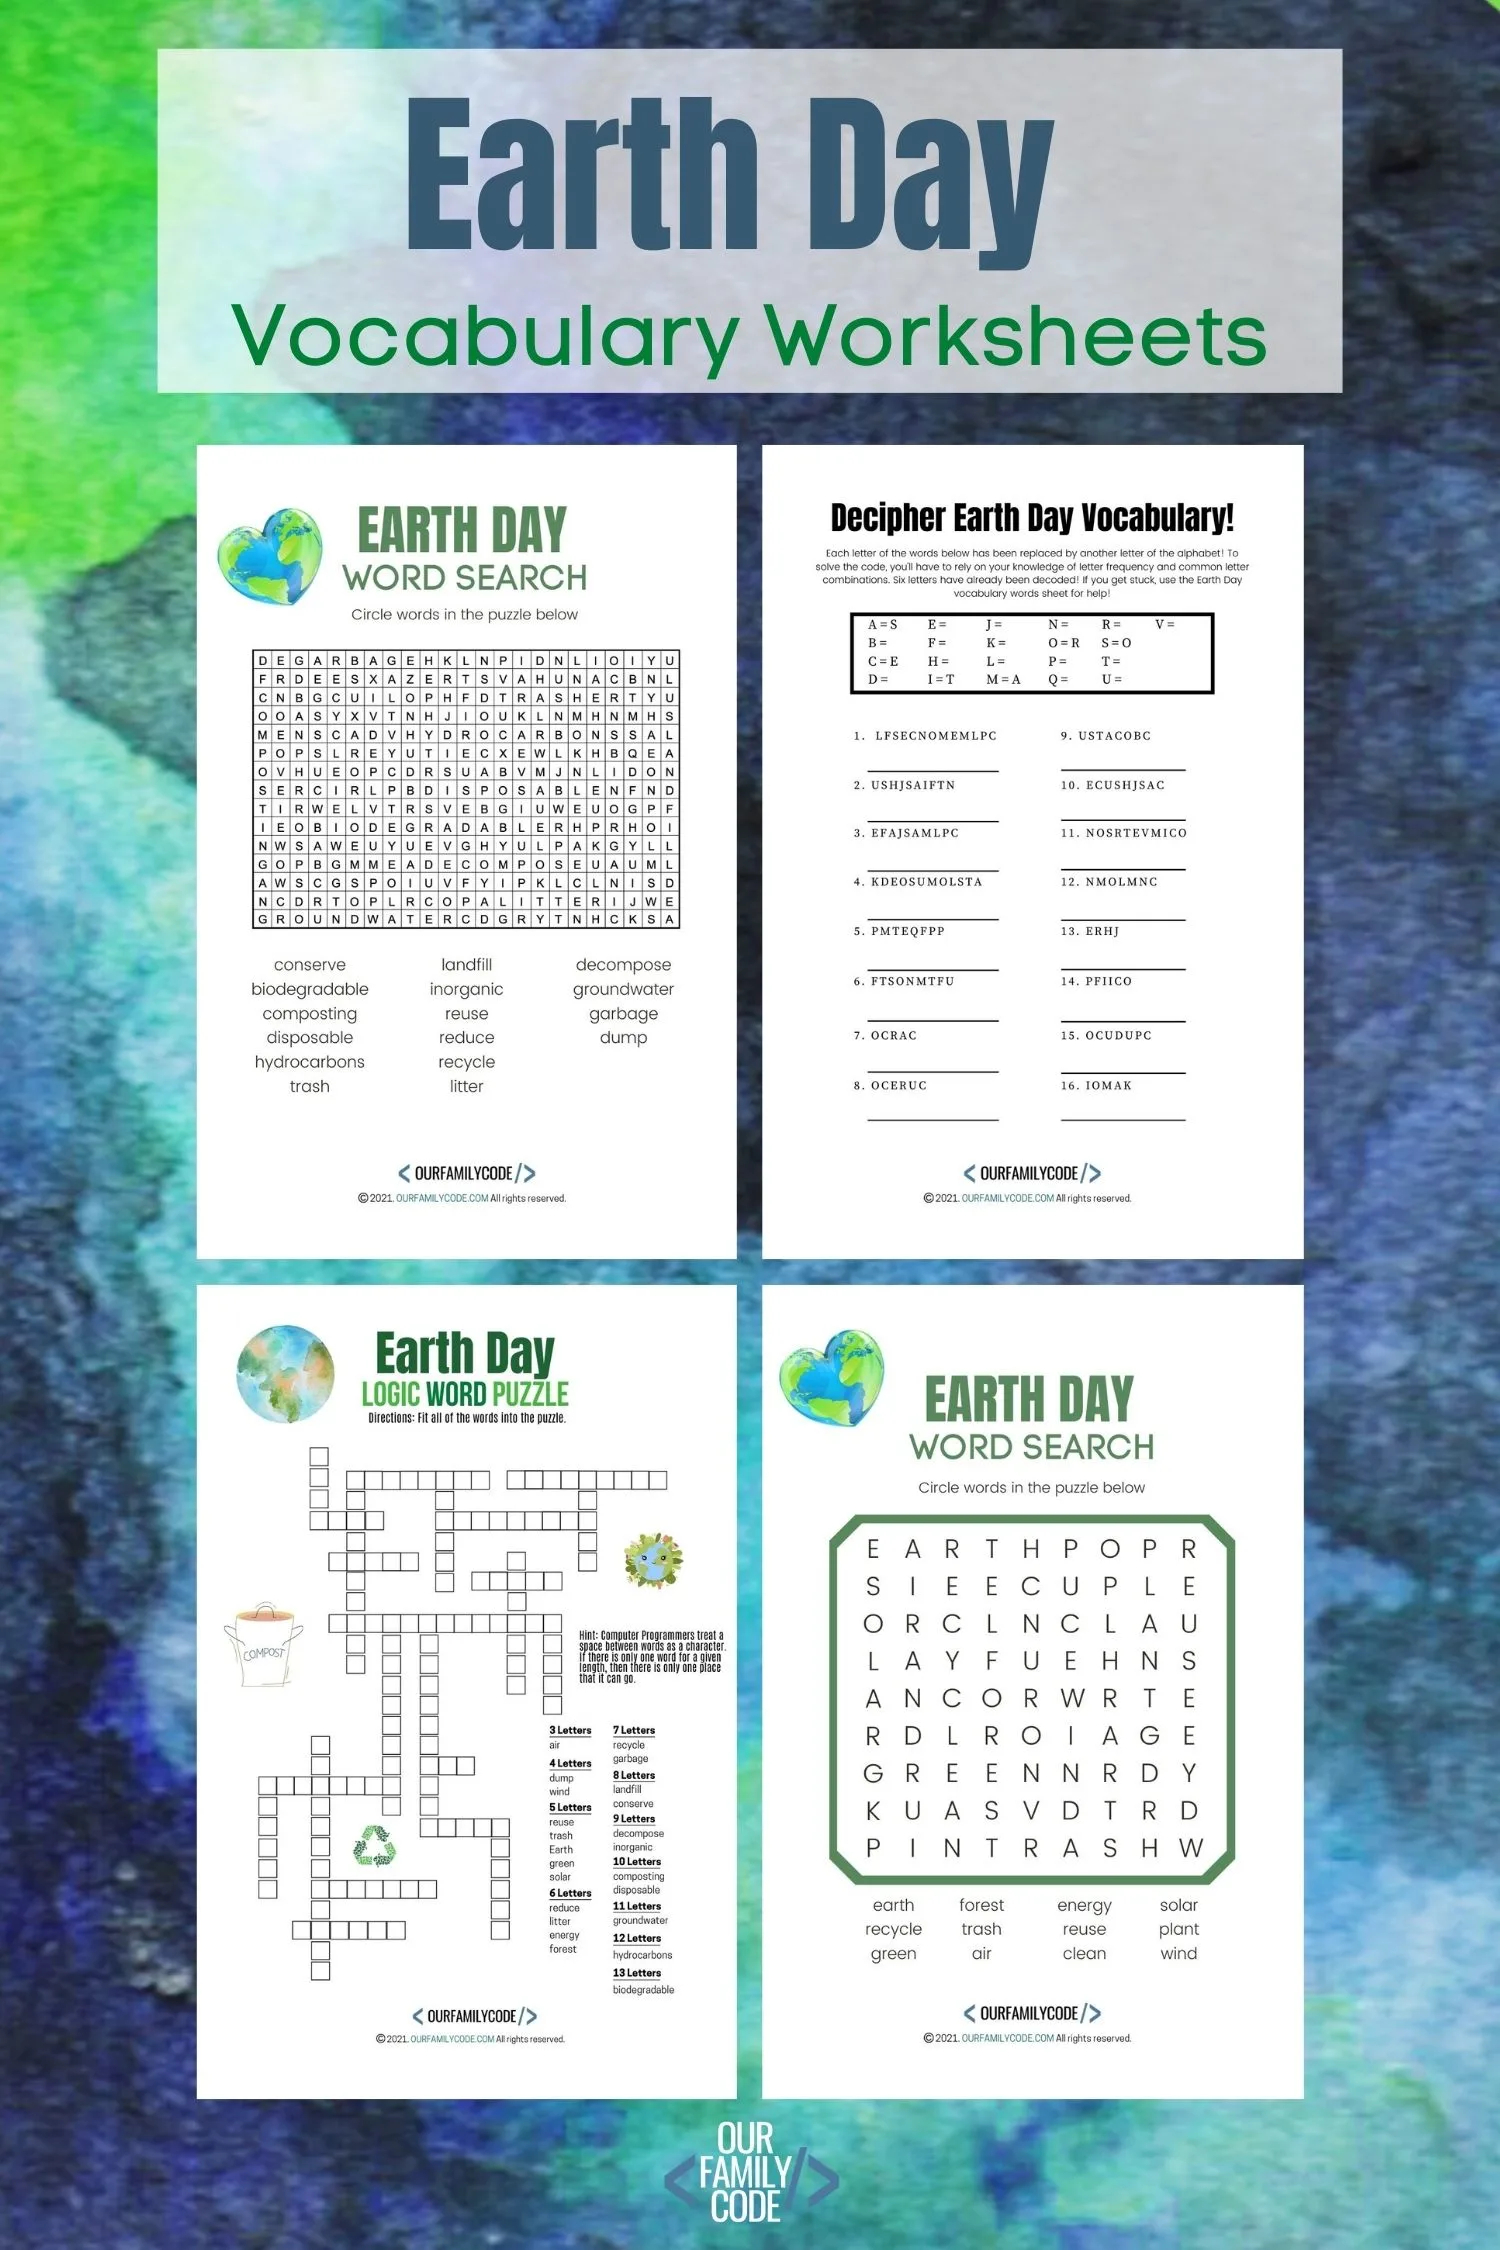 A picture of four Earth Day vocabulary worksheet images on a blue and green watercolor background.